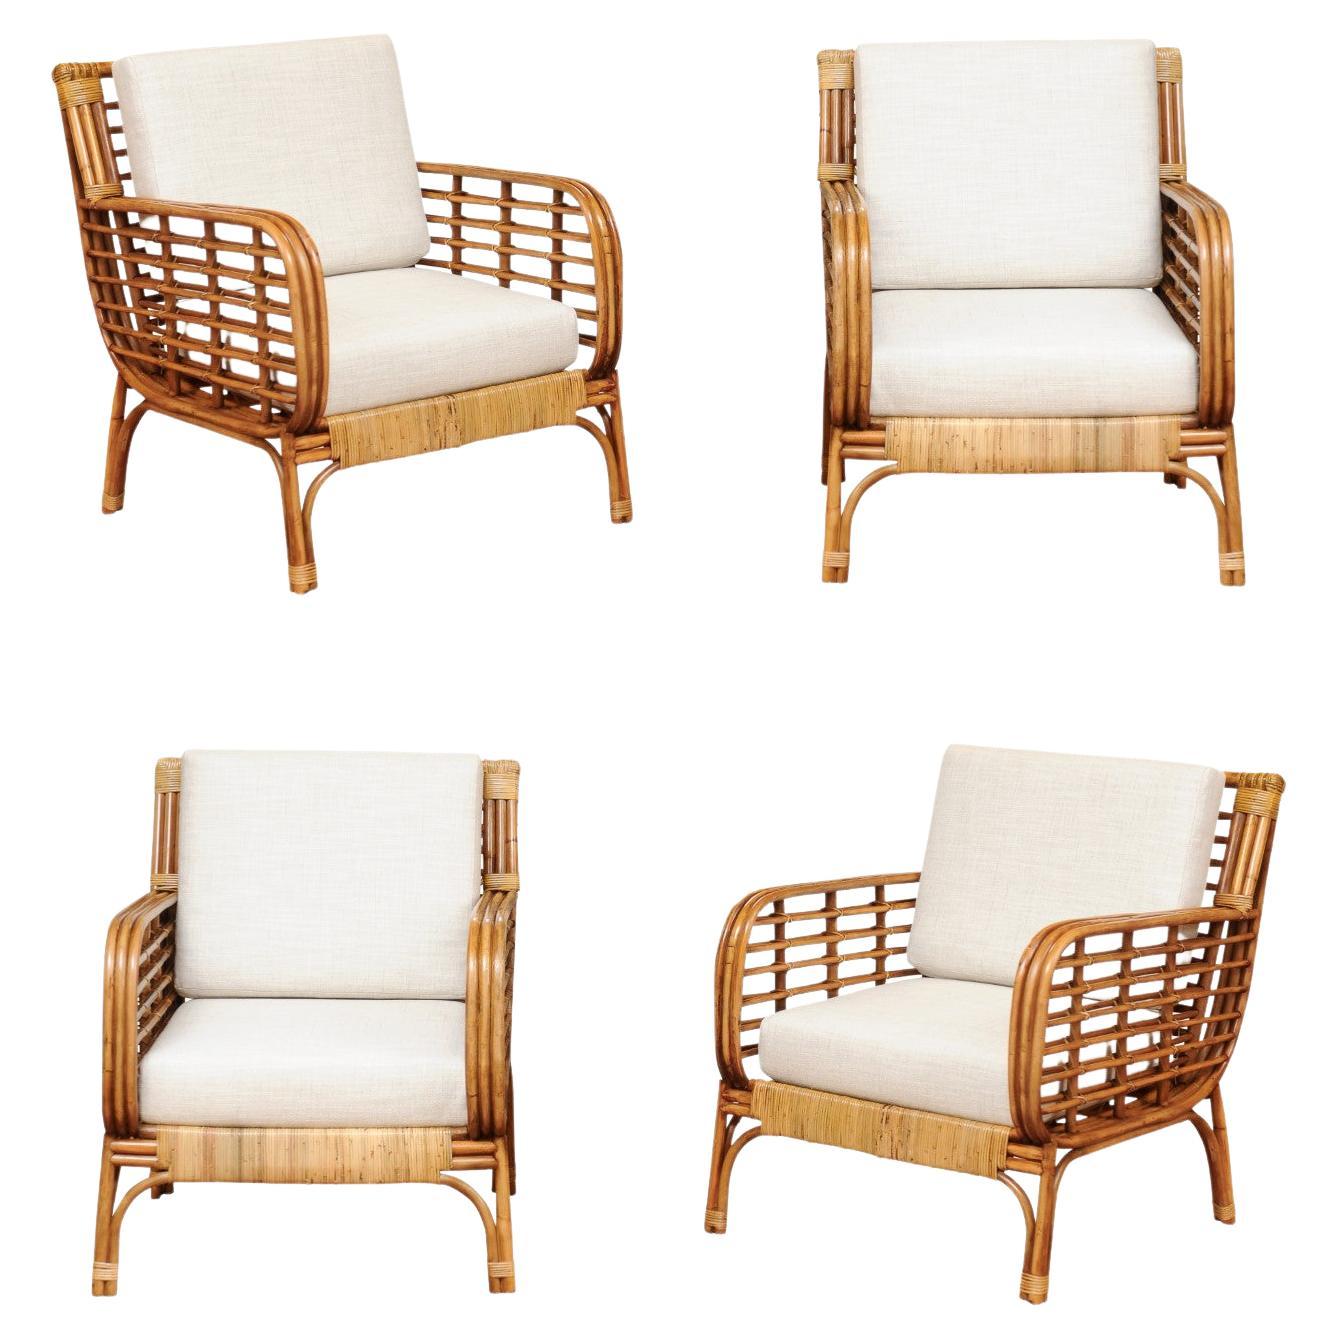 Set of 4 Fabulous Restored Birdcage Style Rattan and Cane Loungers, circa 1955 For Sale